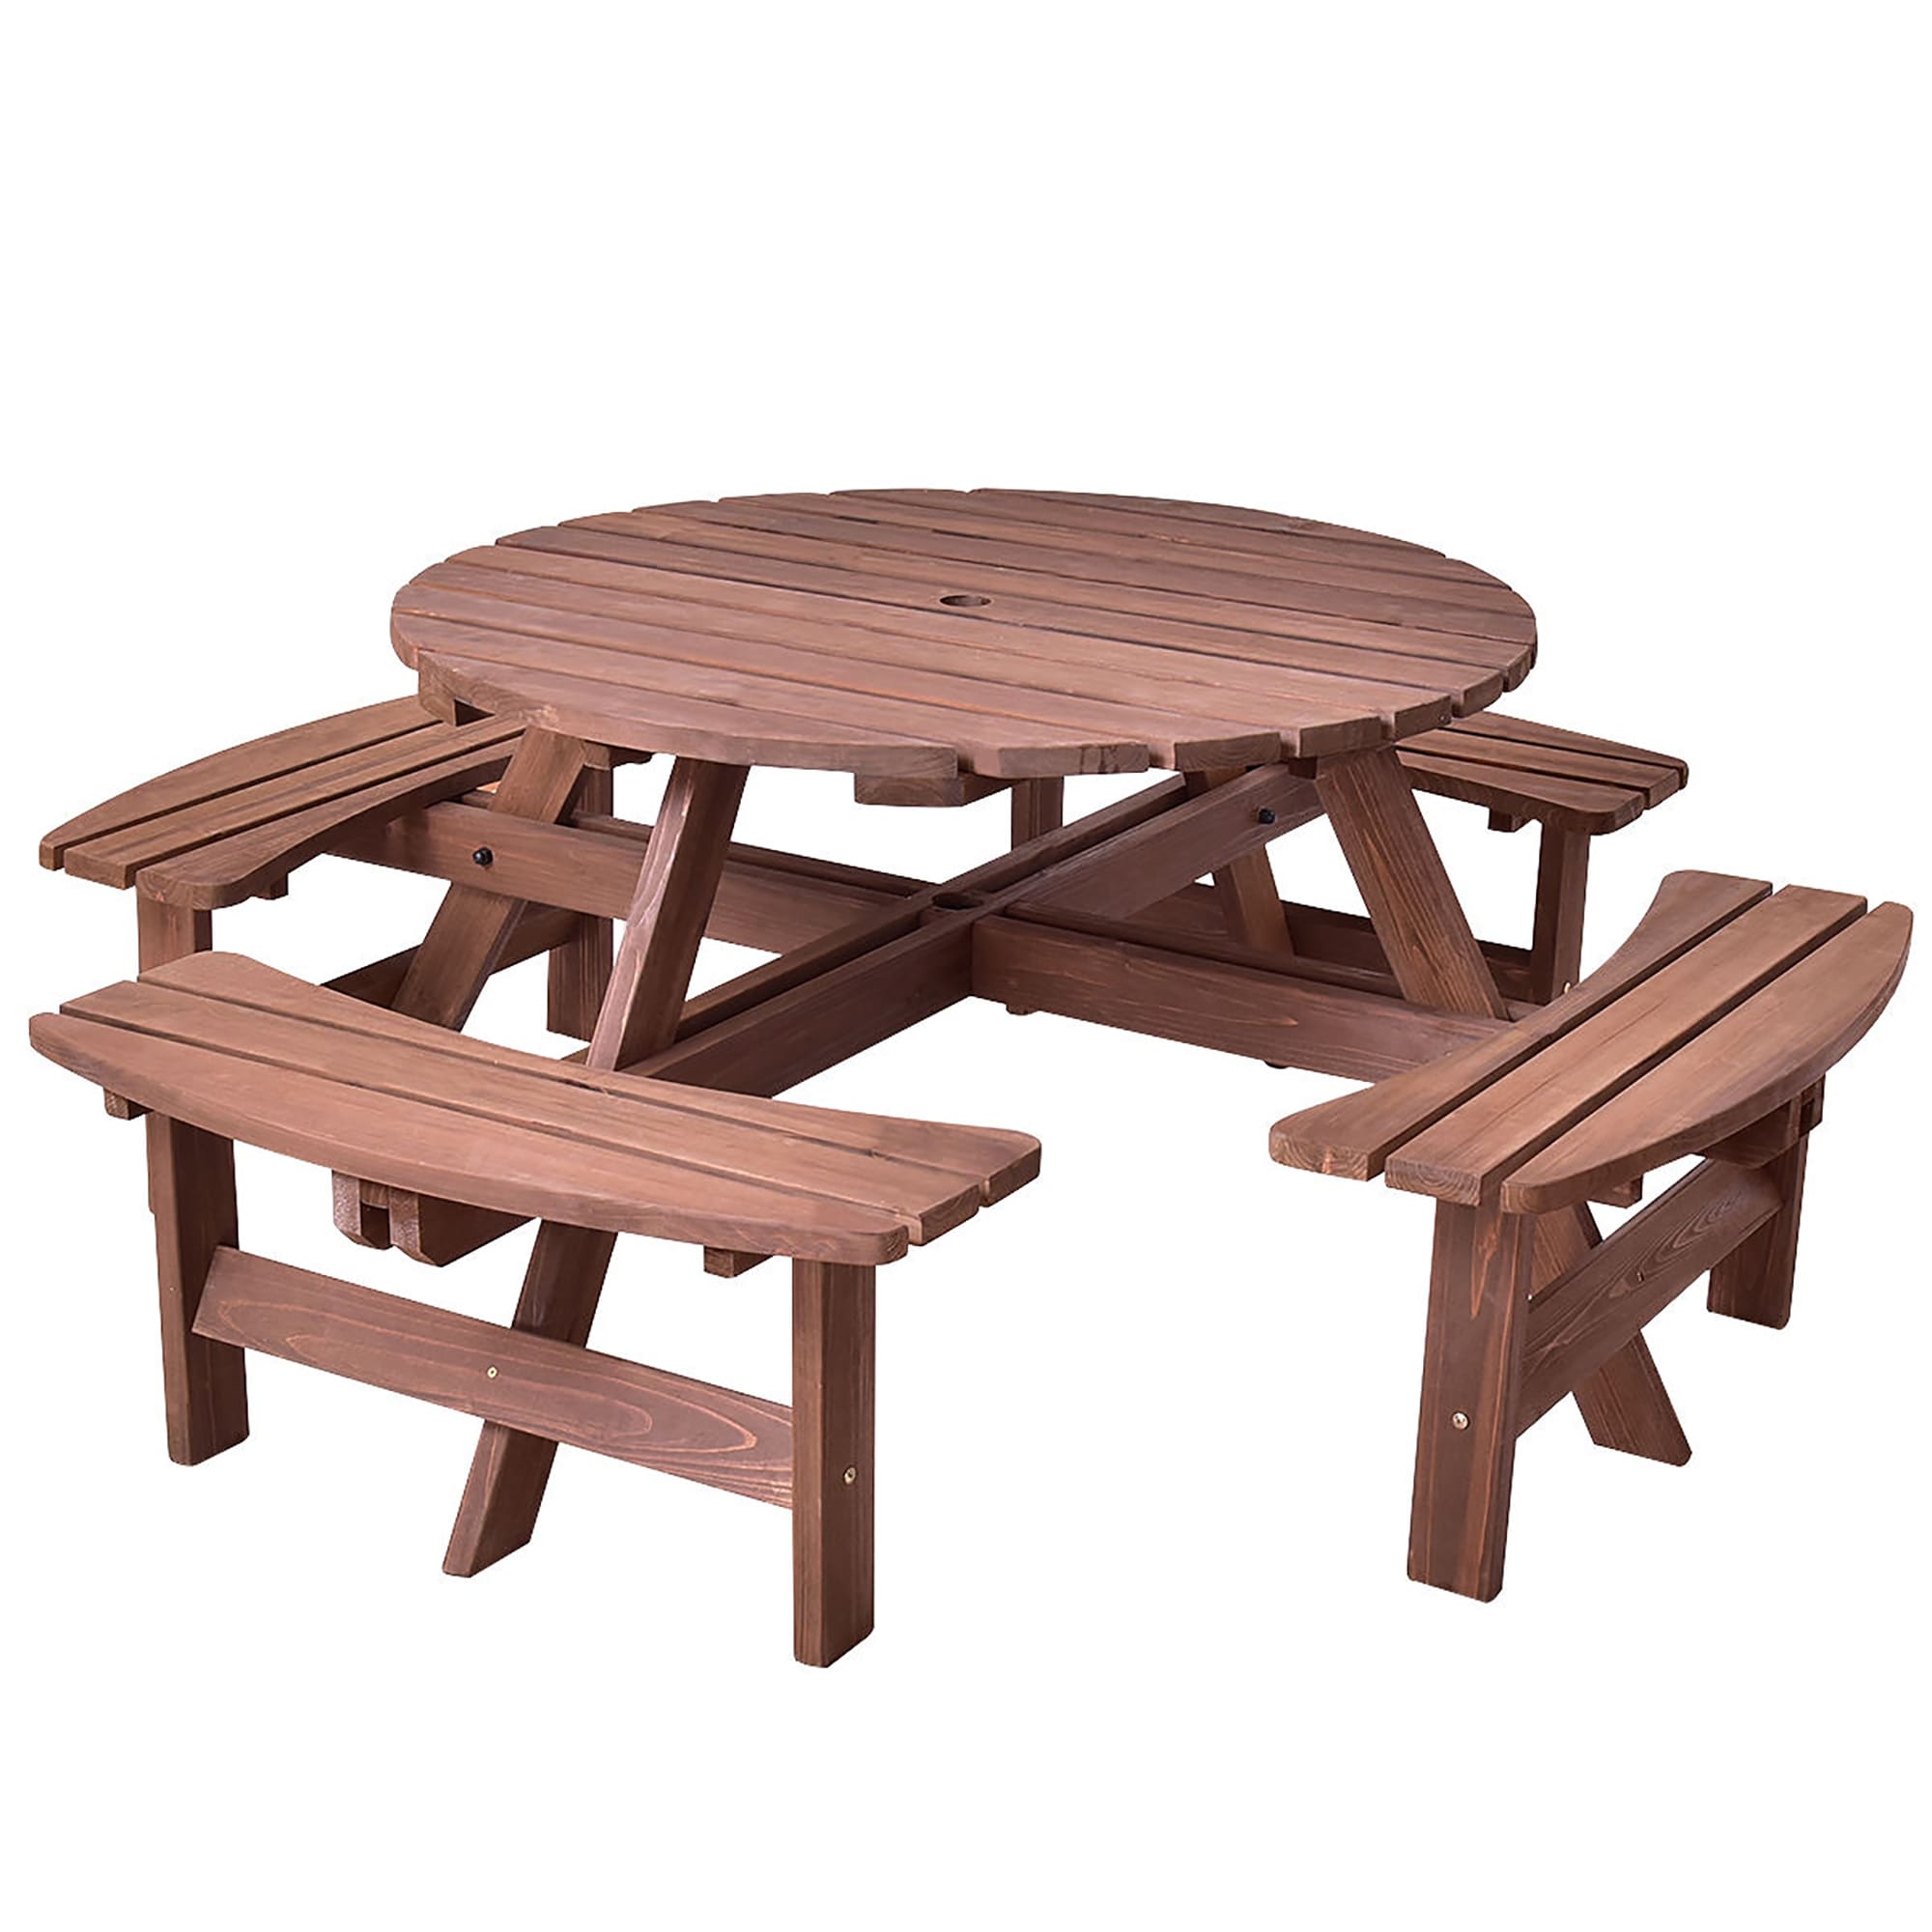 Patio Wooden Picnic Table Set Outdoor Round Table With Umbrella Hole